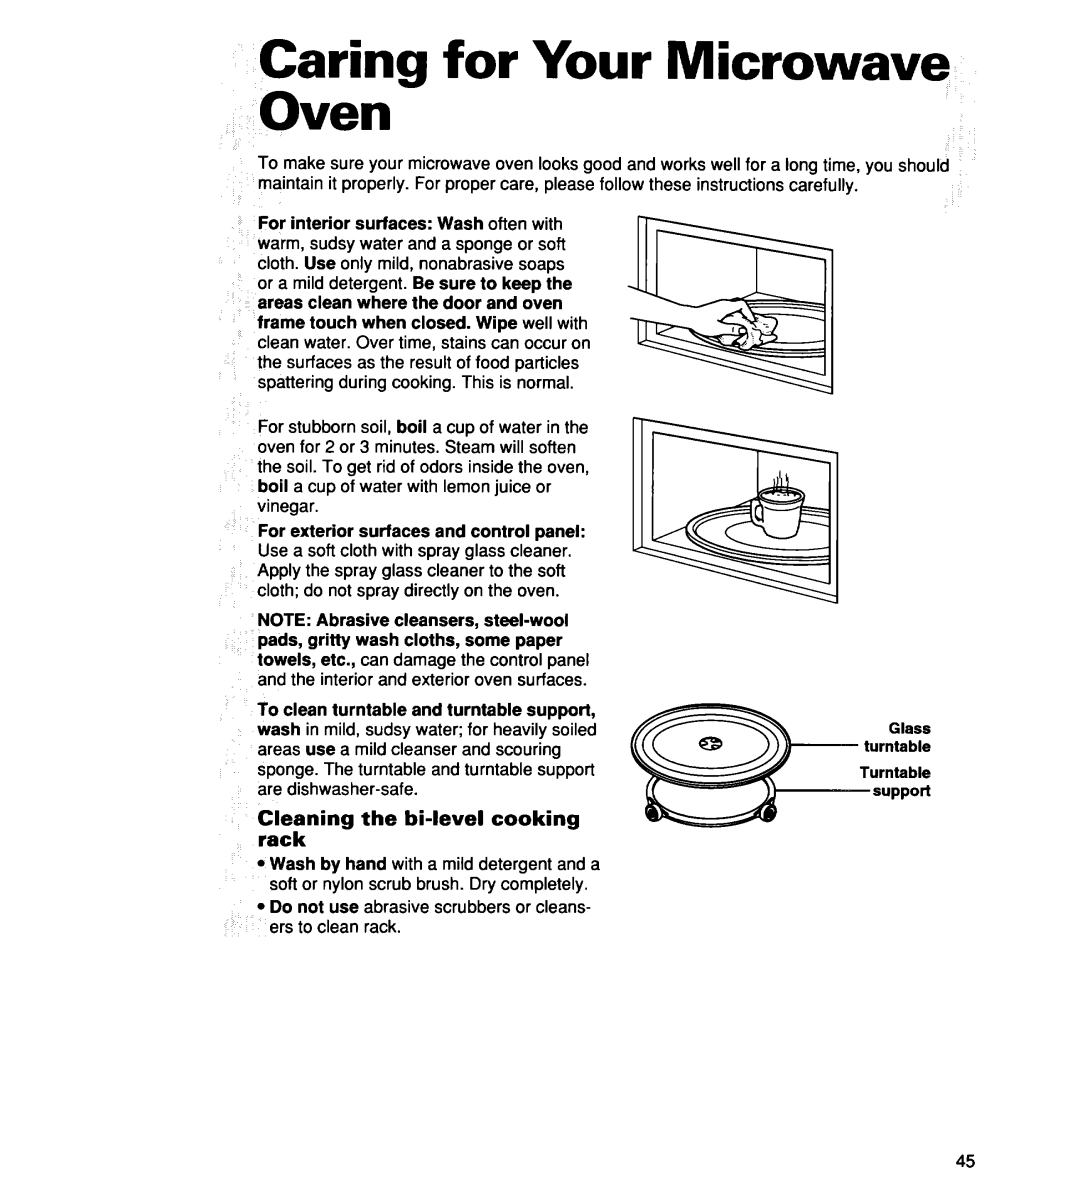 Whirlpool MH7135XE warranty Caring for Your Microwave Oven, Cleaning the bi-levelcooking rack 